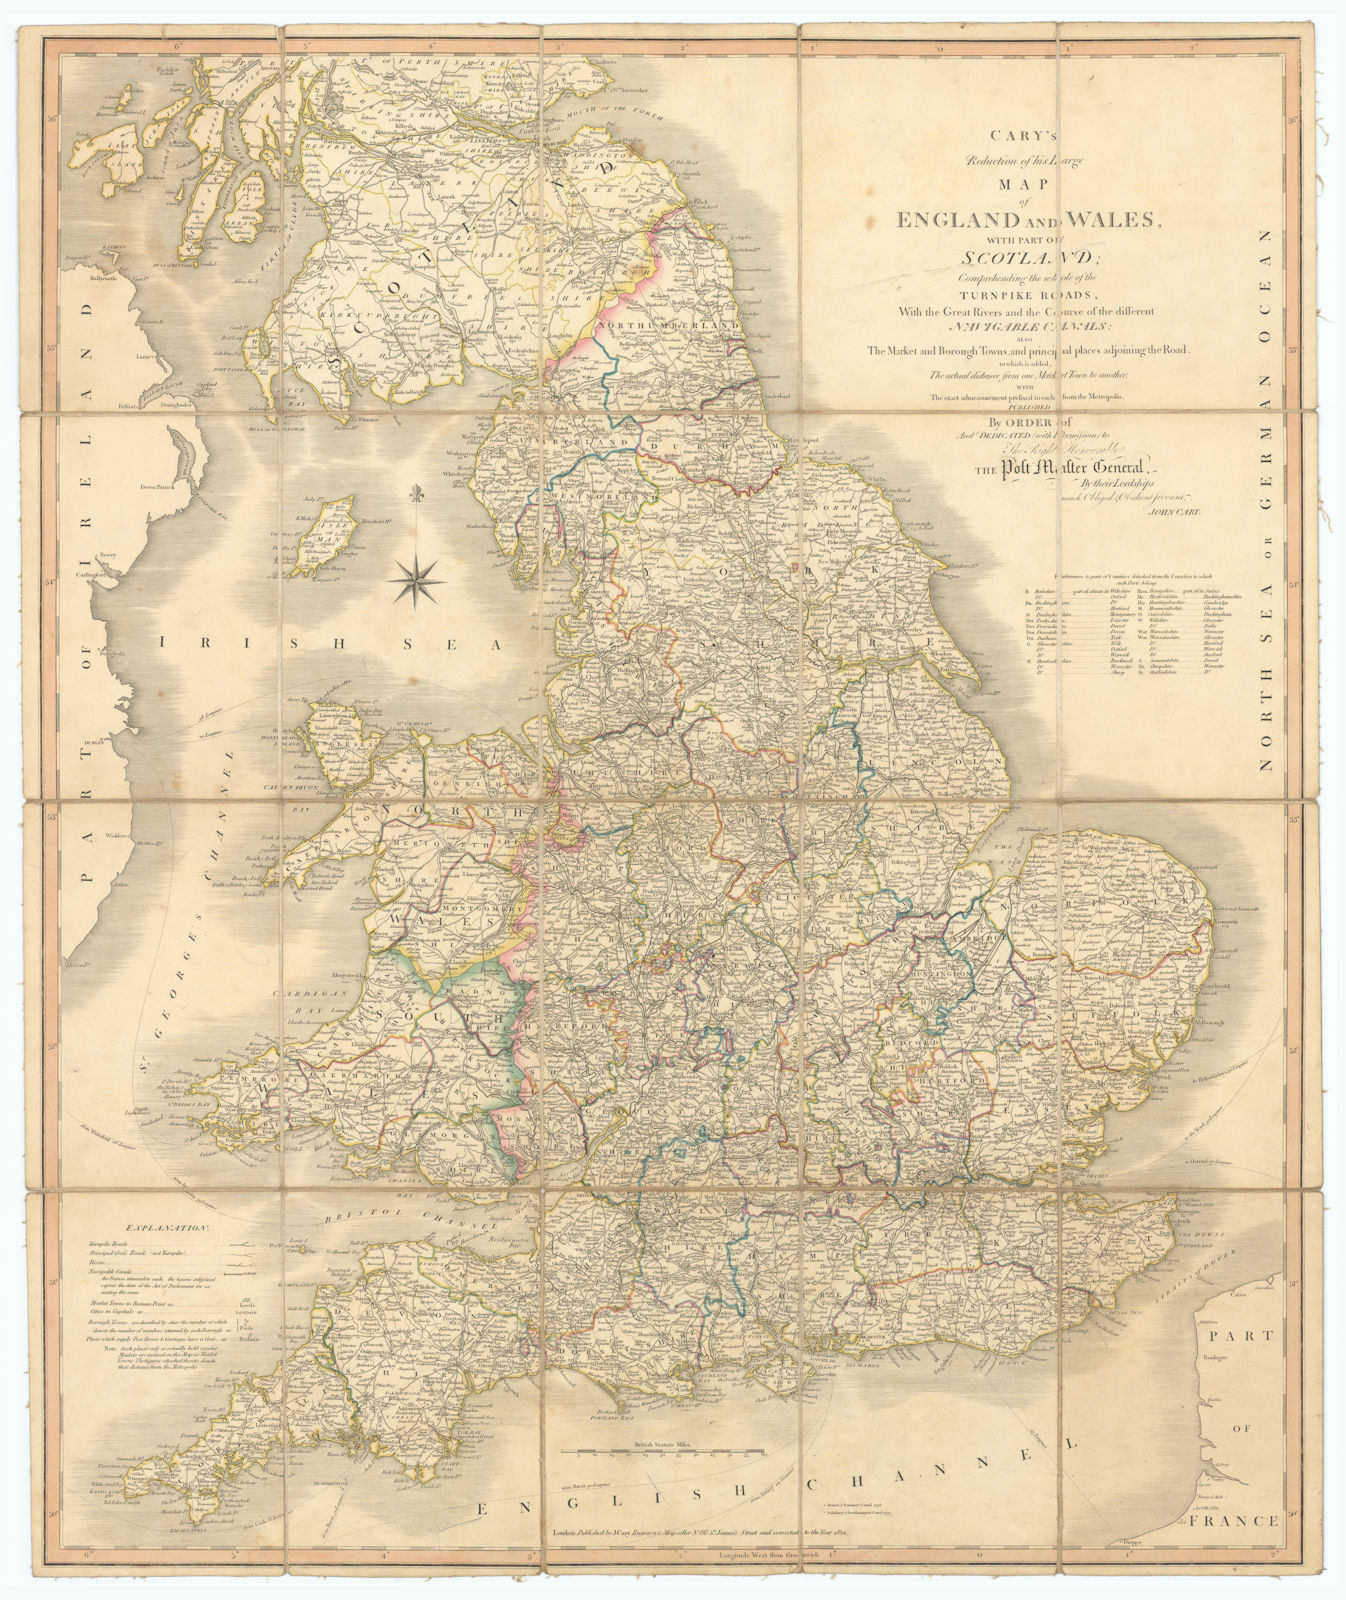 Associate Product 'Cary's reduction of his large map of England & Wales'. Turnpikes canals &c 1821